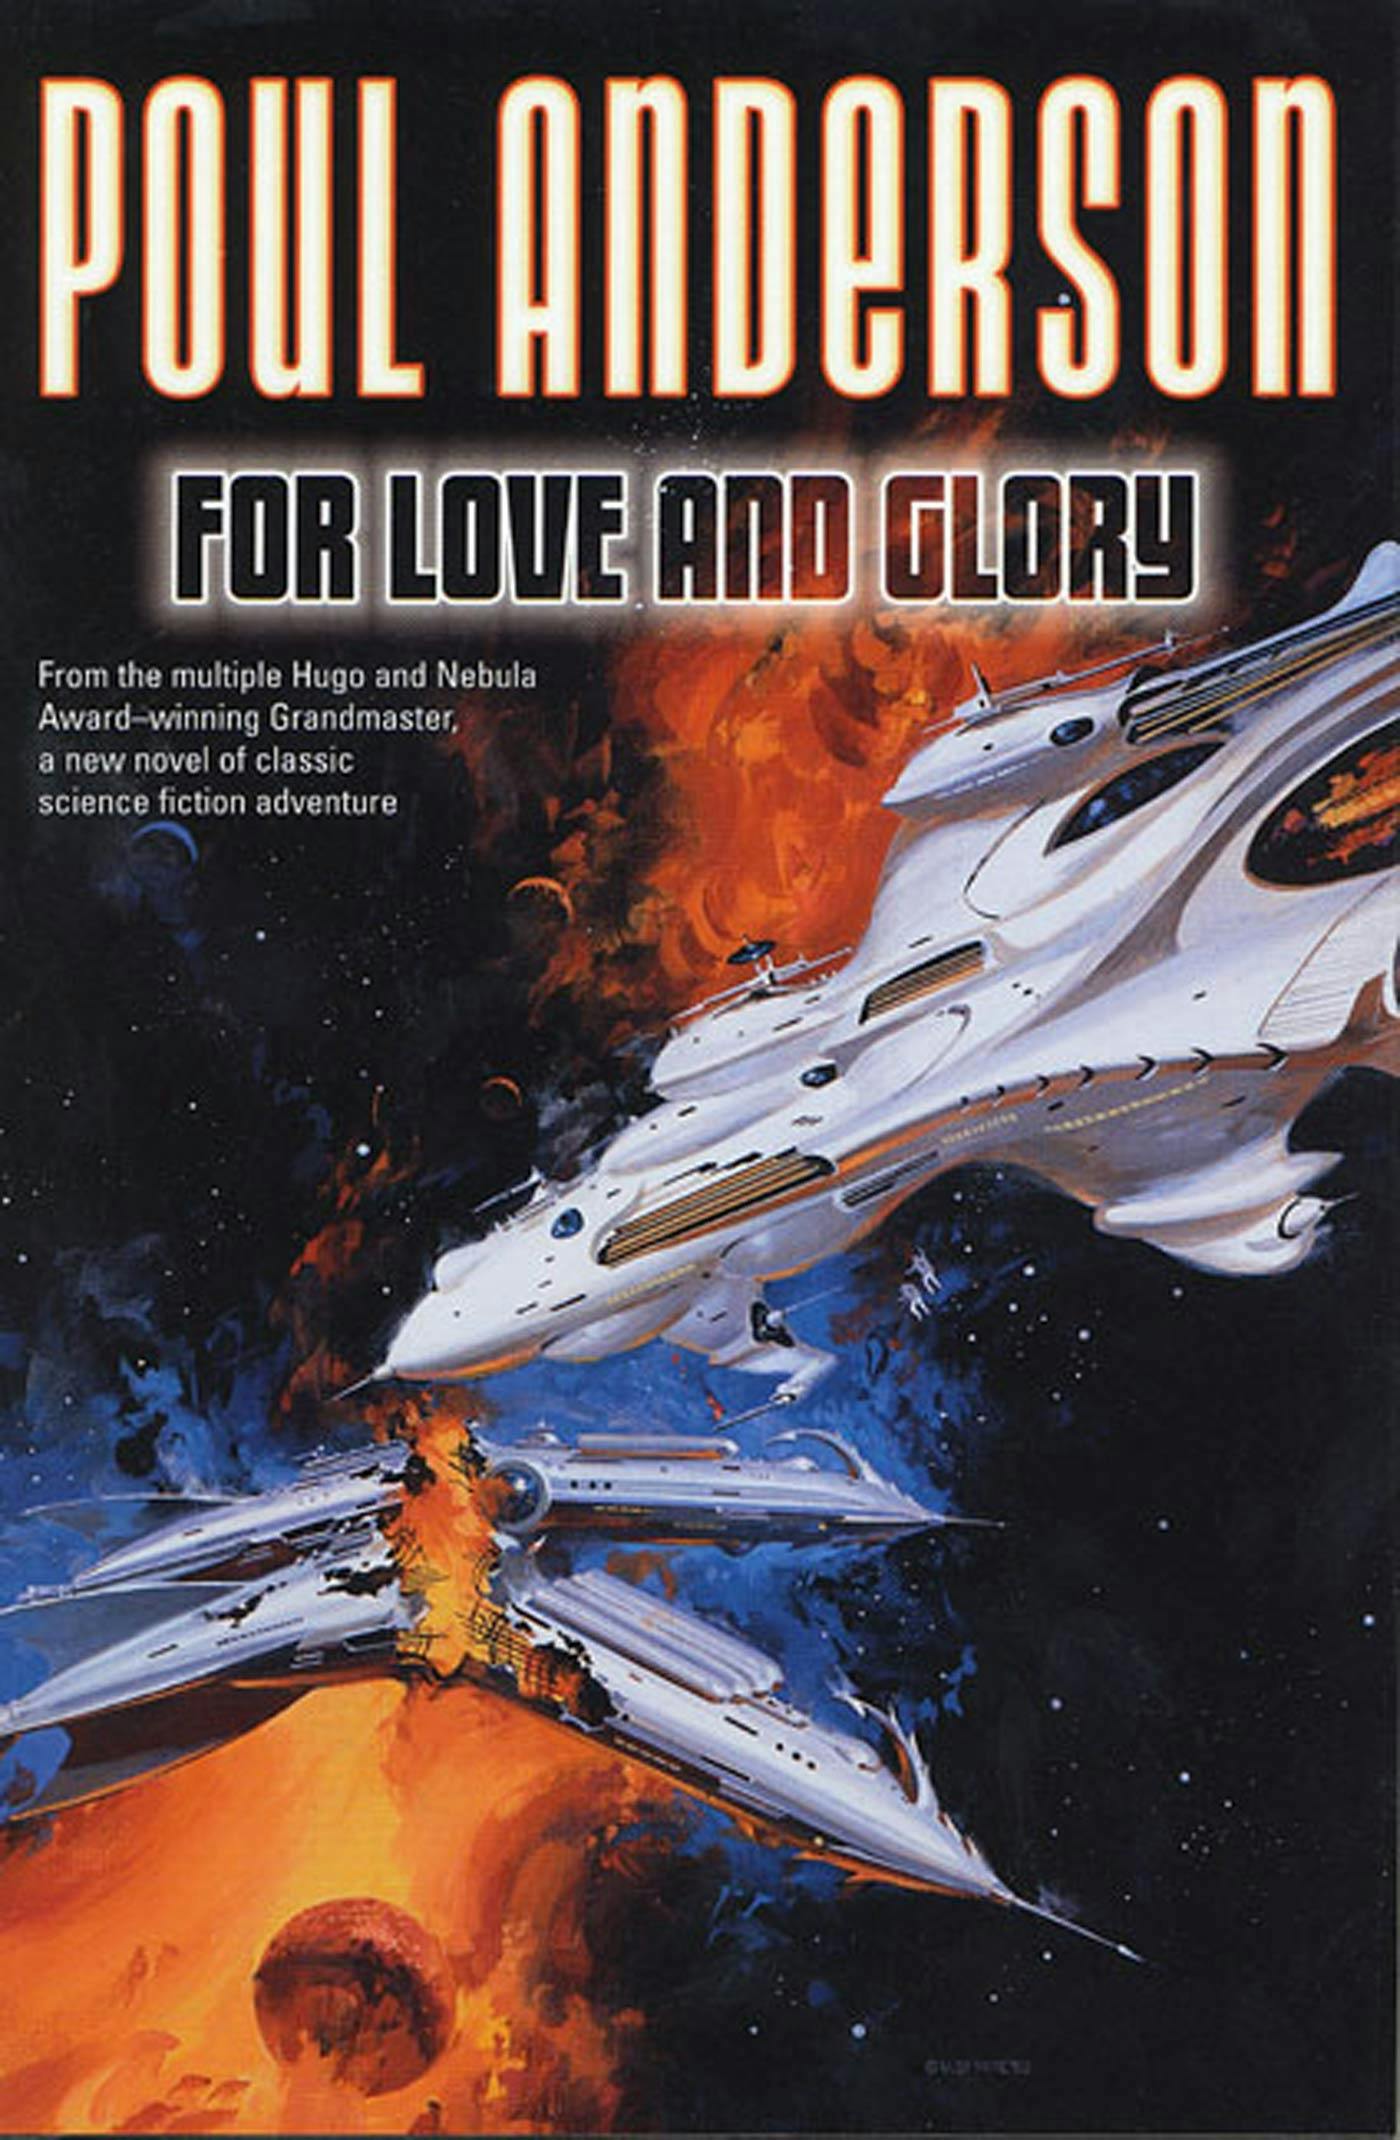 Cover for the book titled as: For Love and Glory